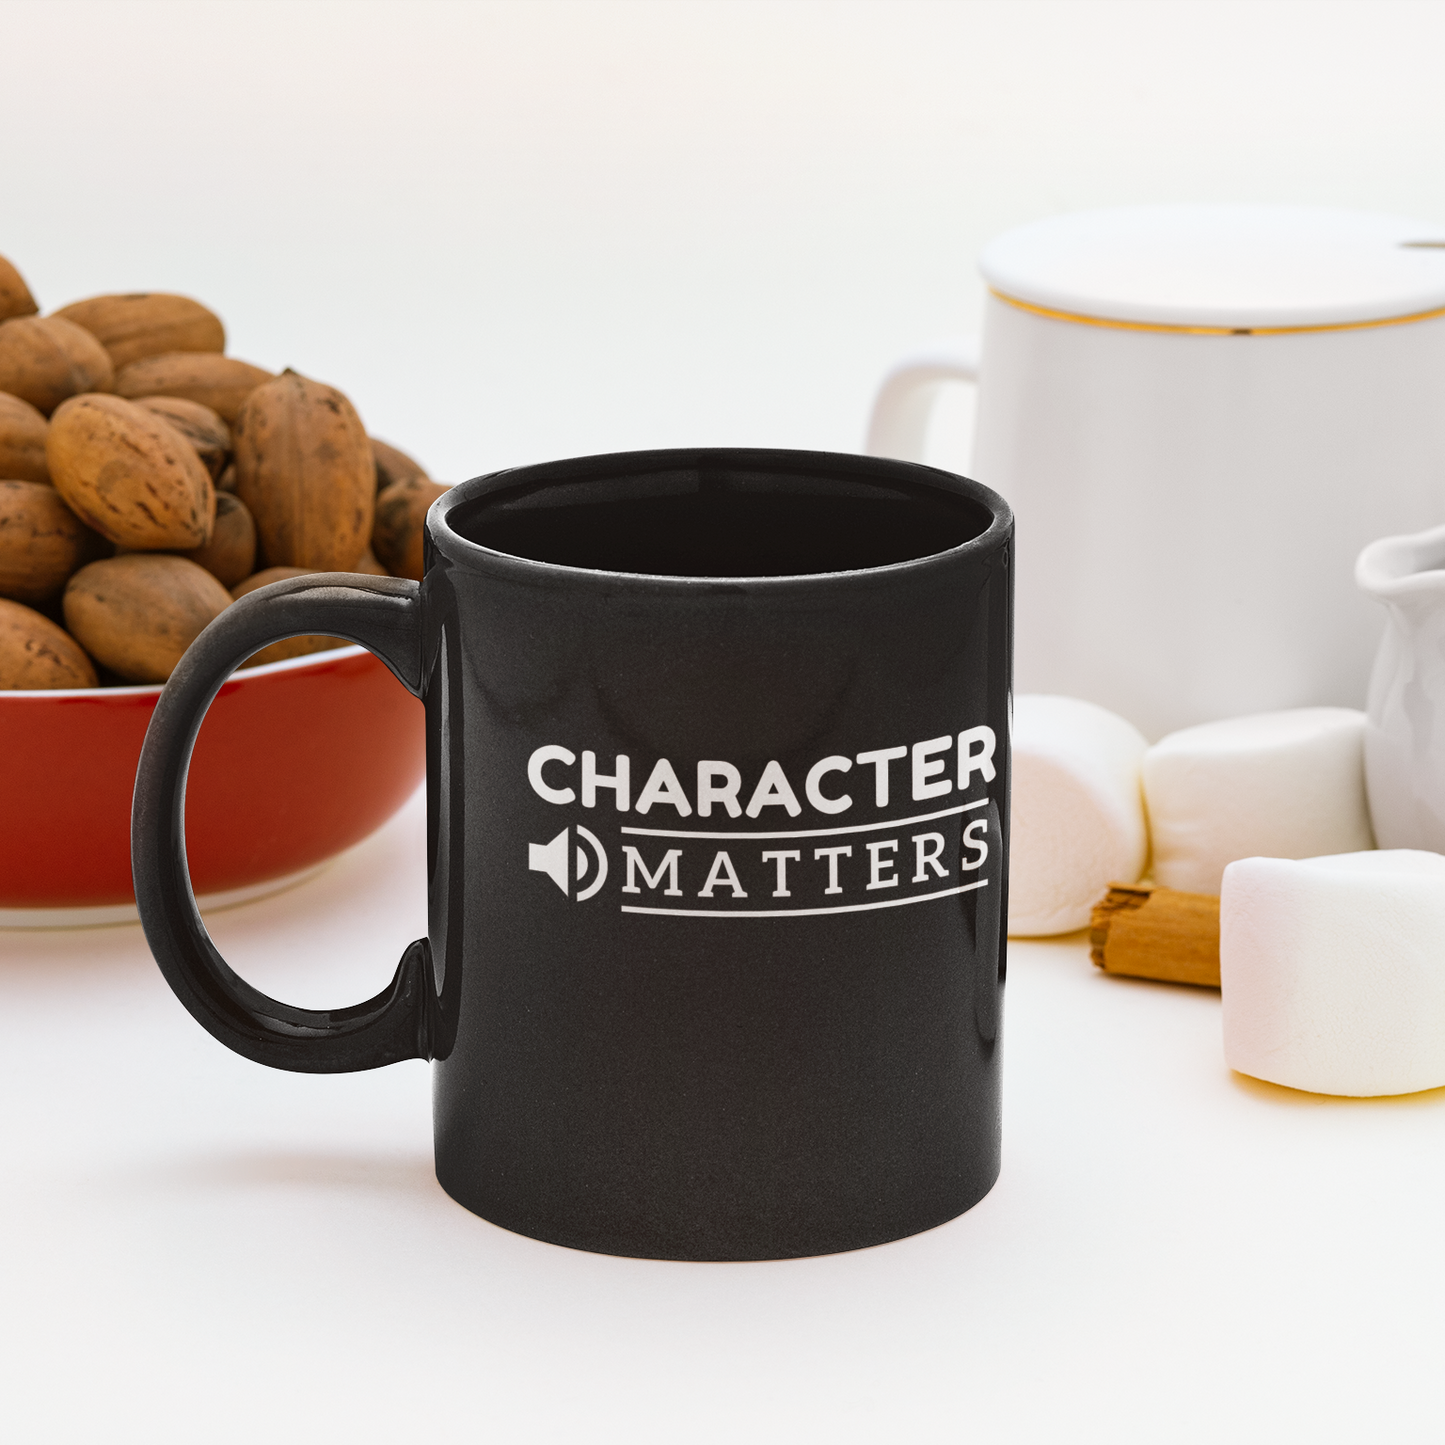 Character Matters expressive personality - the mug to trust the process